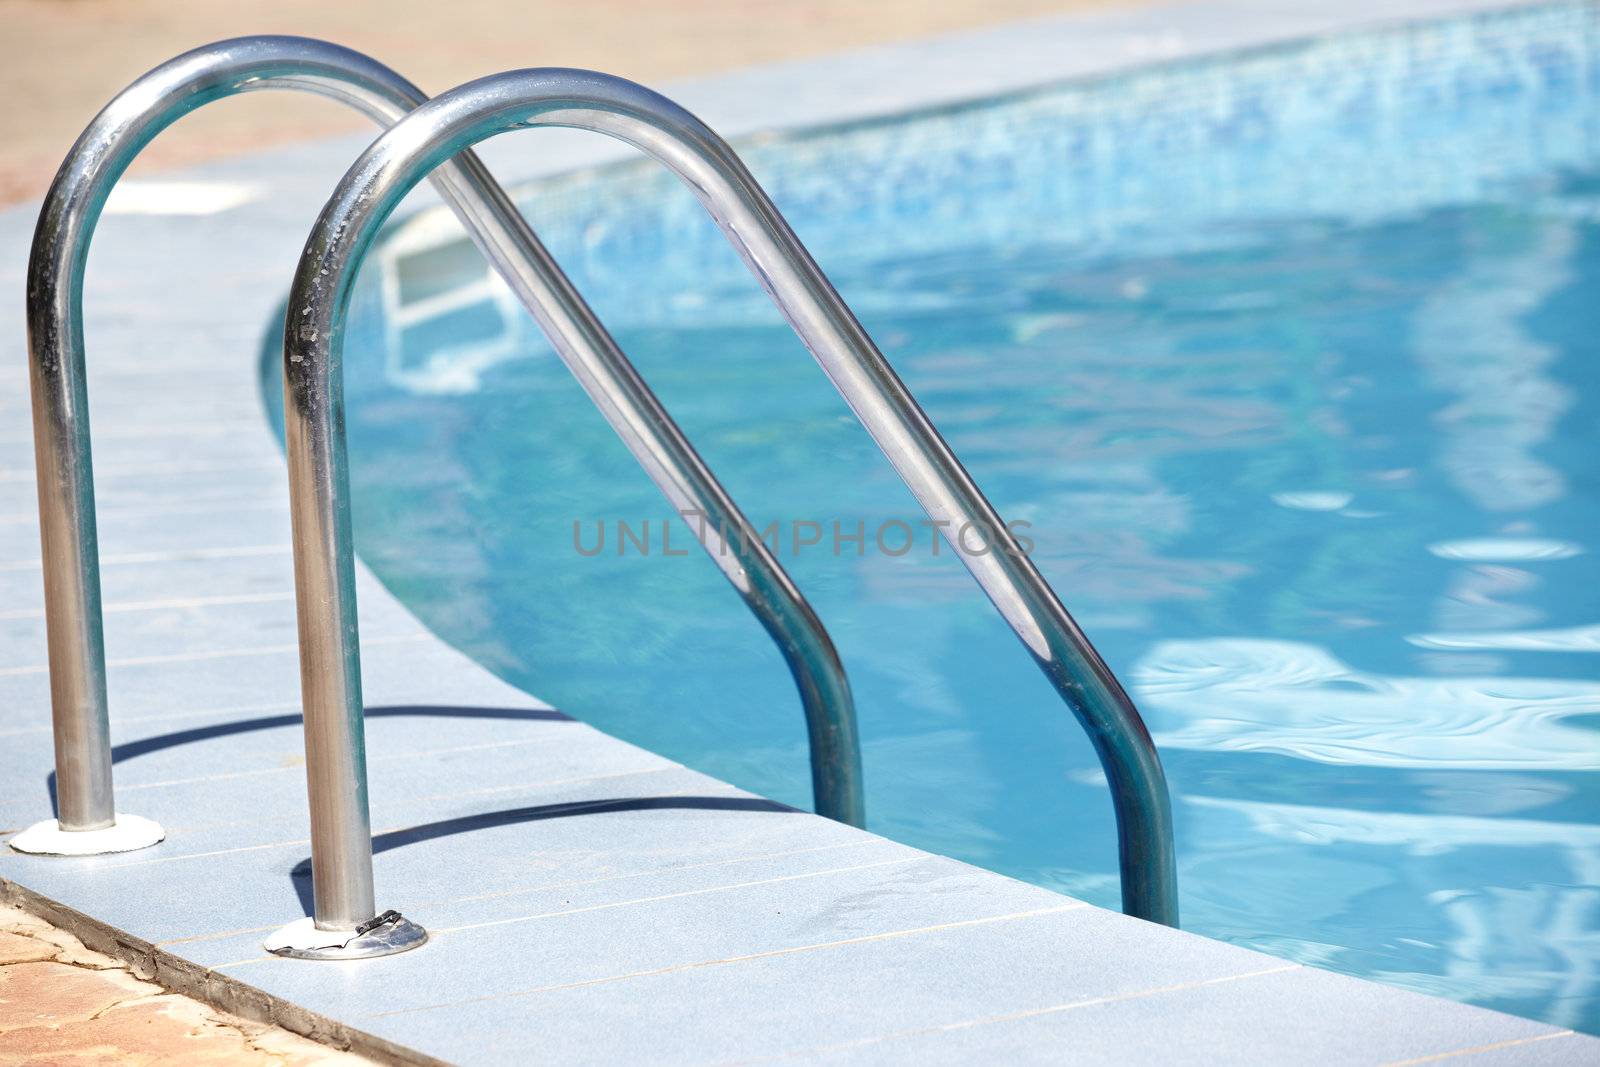 Handrail of the public swimming pool by Novic